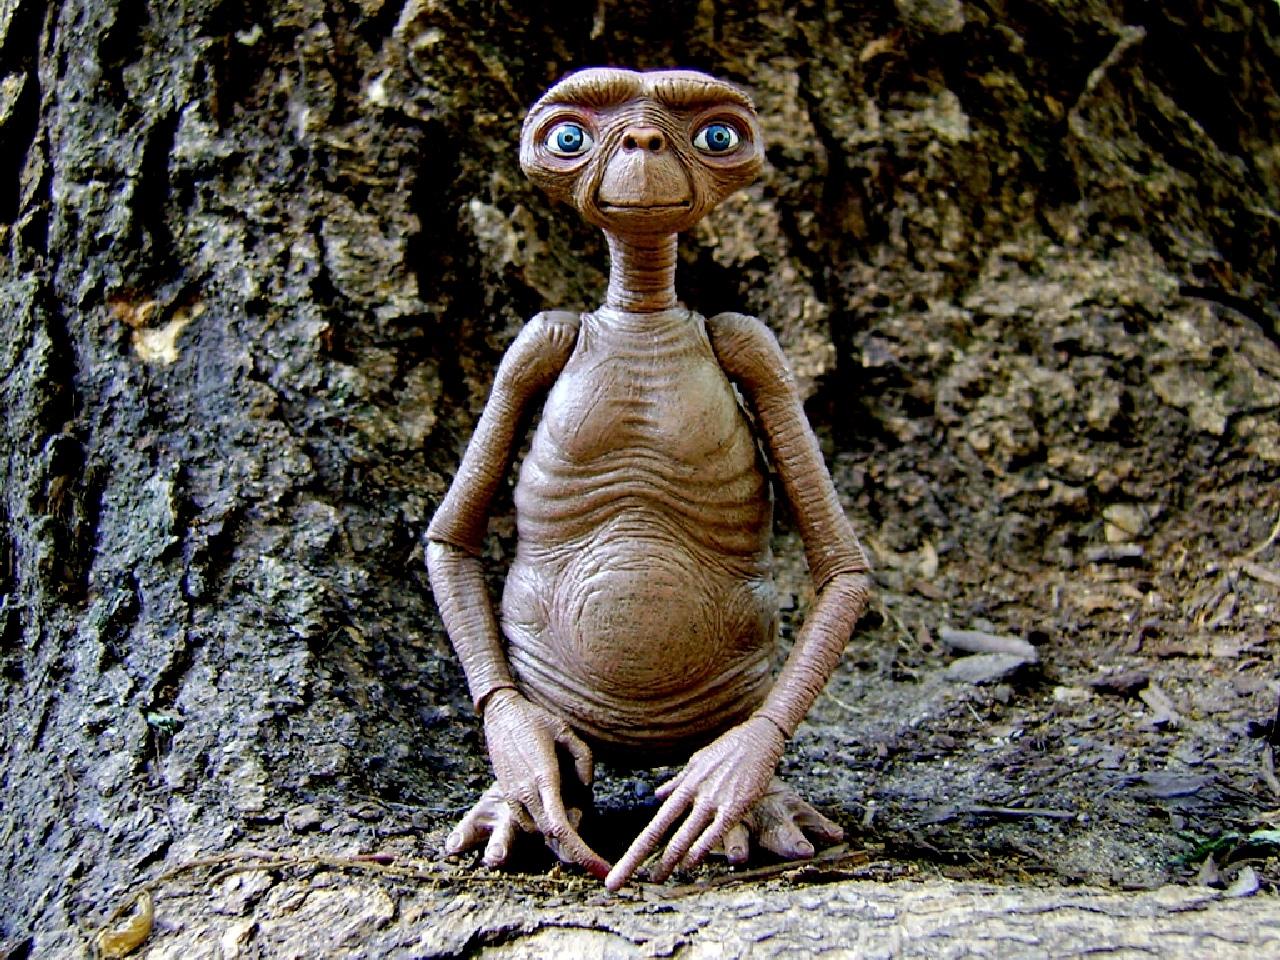 E.T. the Extra-Terrestrial for ios instal free